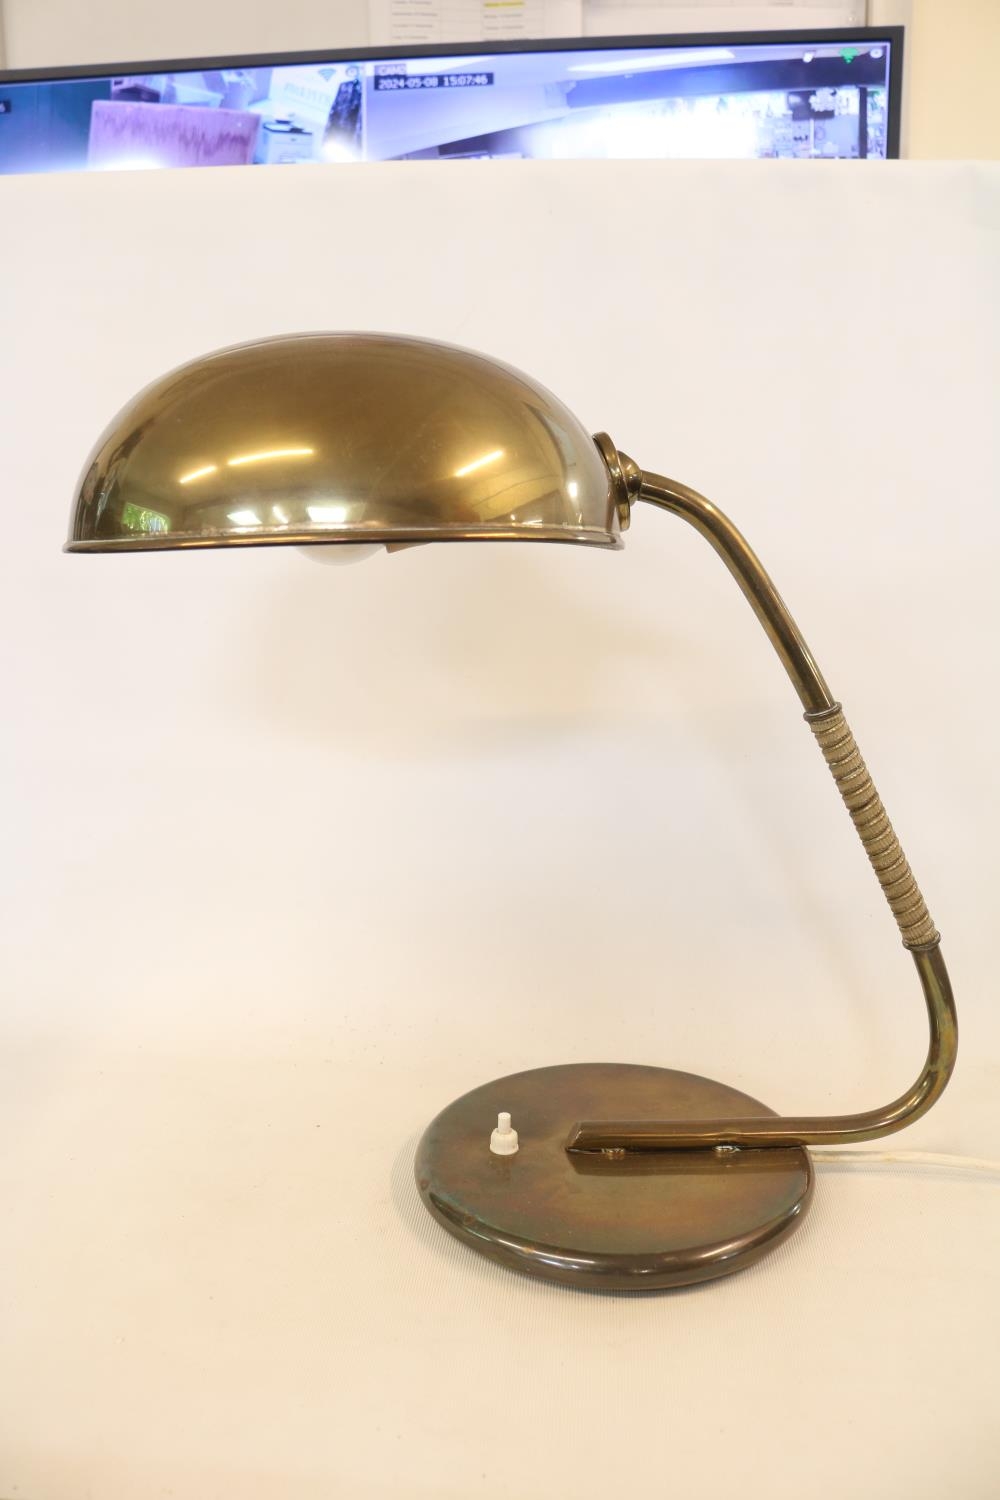 Danish influenced brass 1940s modernist Bauhaus influenced table lamp with braided hand grip, - Image 2 of 3